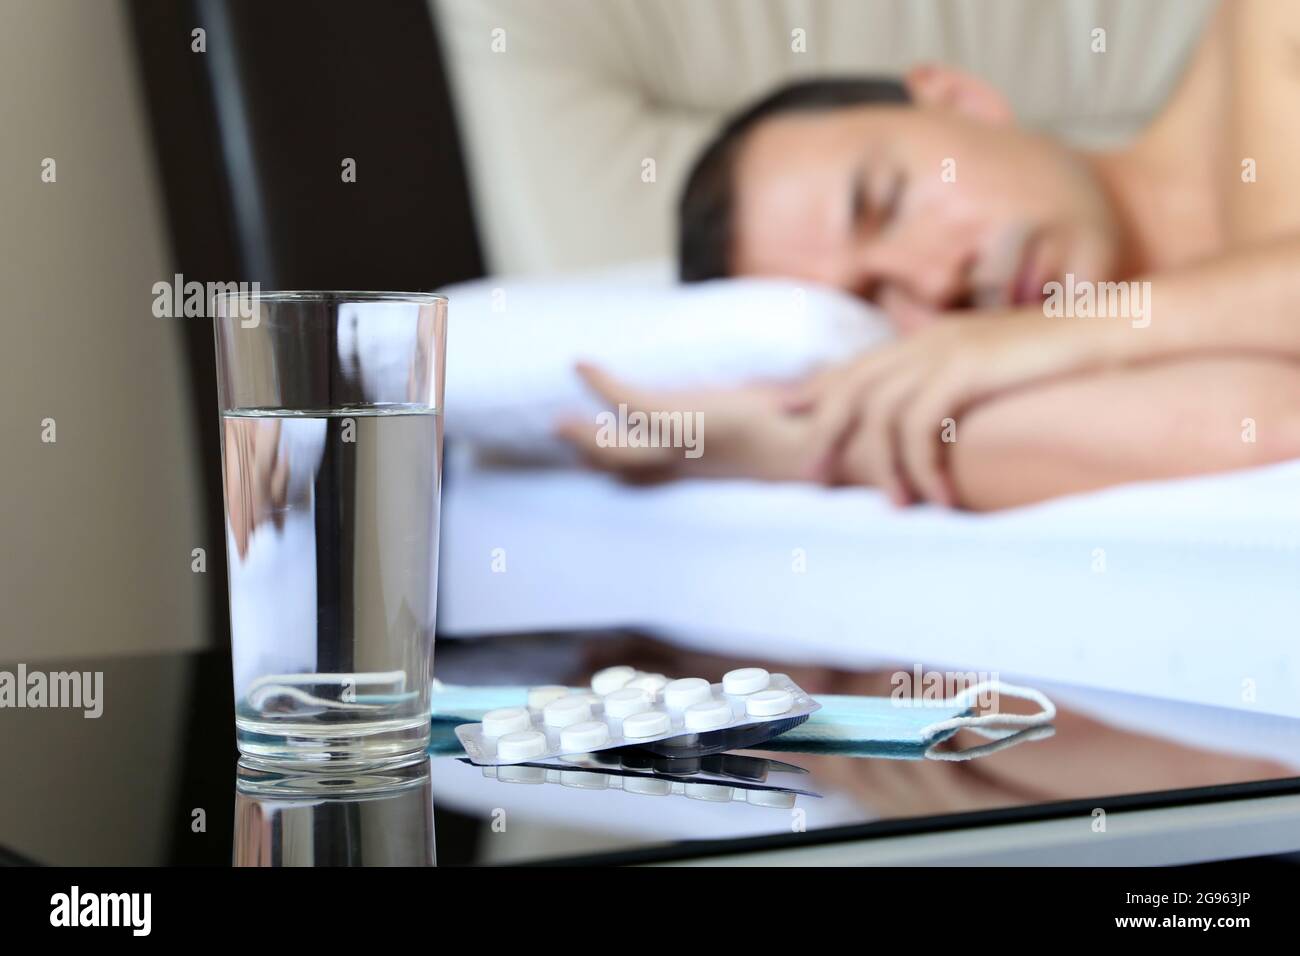 Sick man sleeping in a bed, pills and water glass in the foreground. Concept of illness, fever, coronavirus symptoms Stock Photo